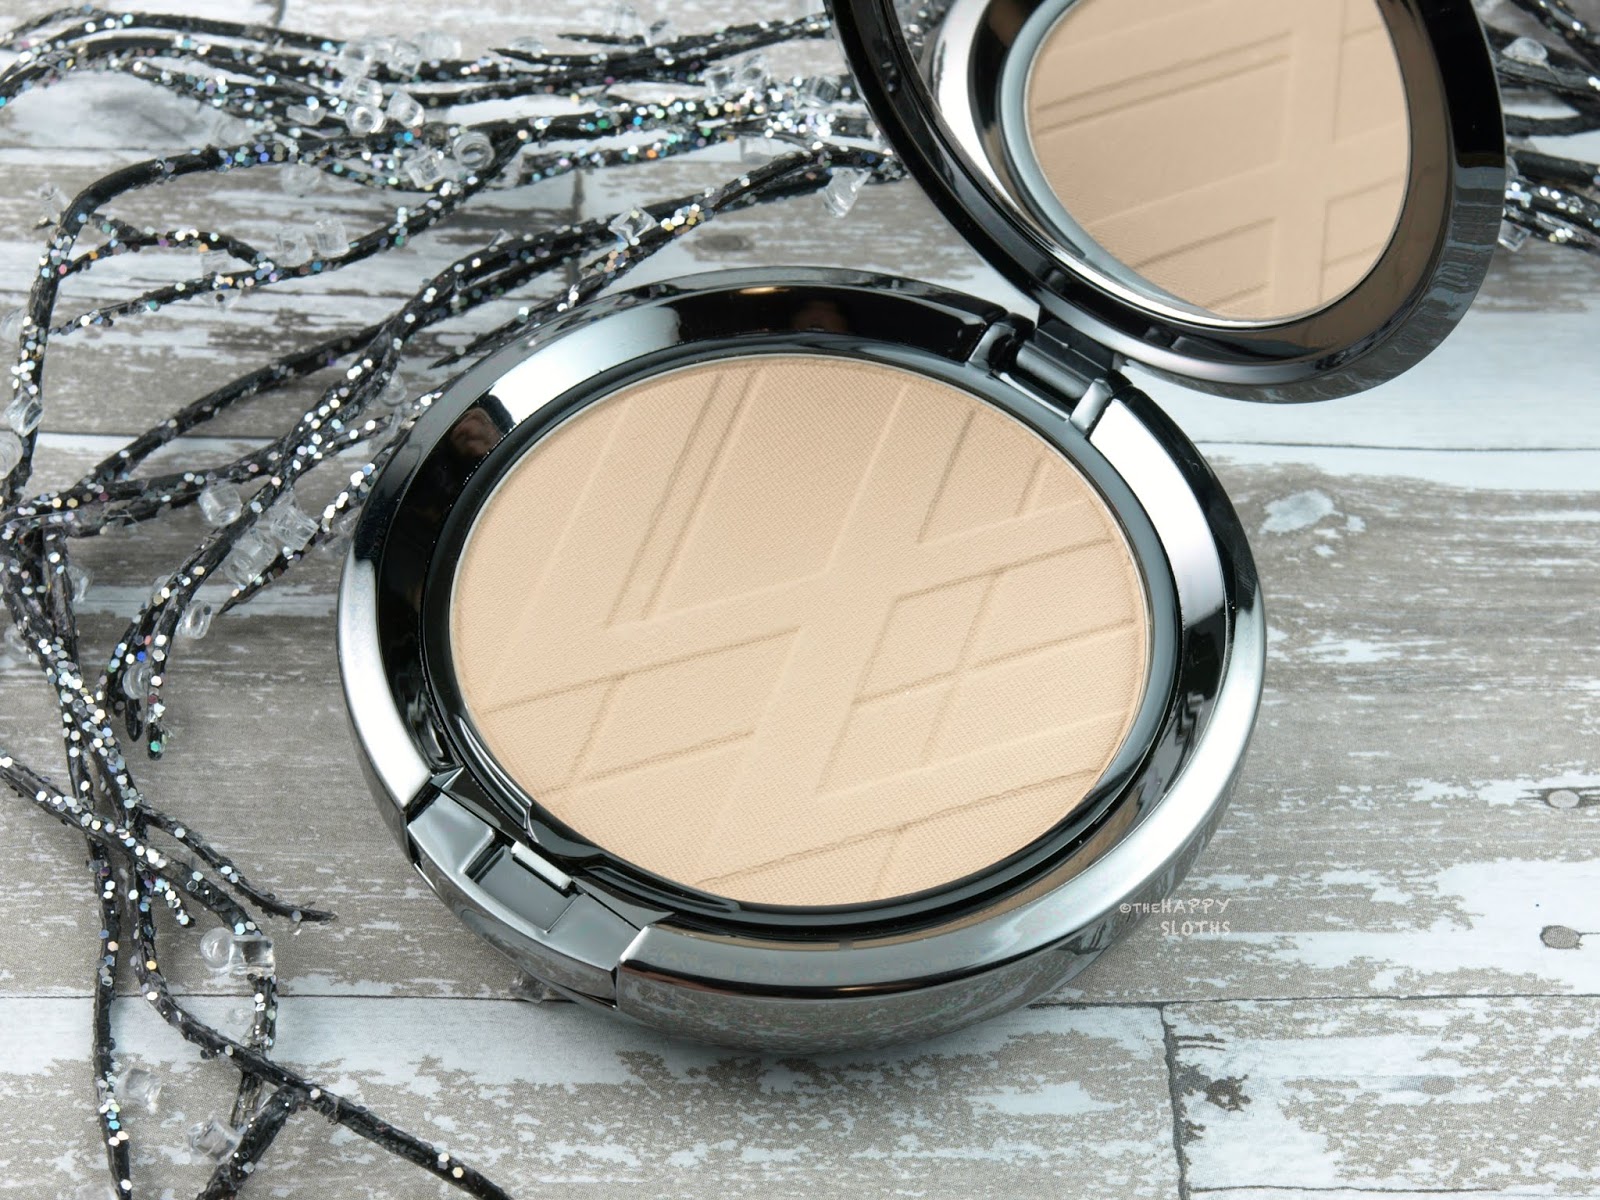 Lise Watier | Teint Multi-Fini Compact Foundation: Review and Swatches